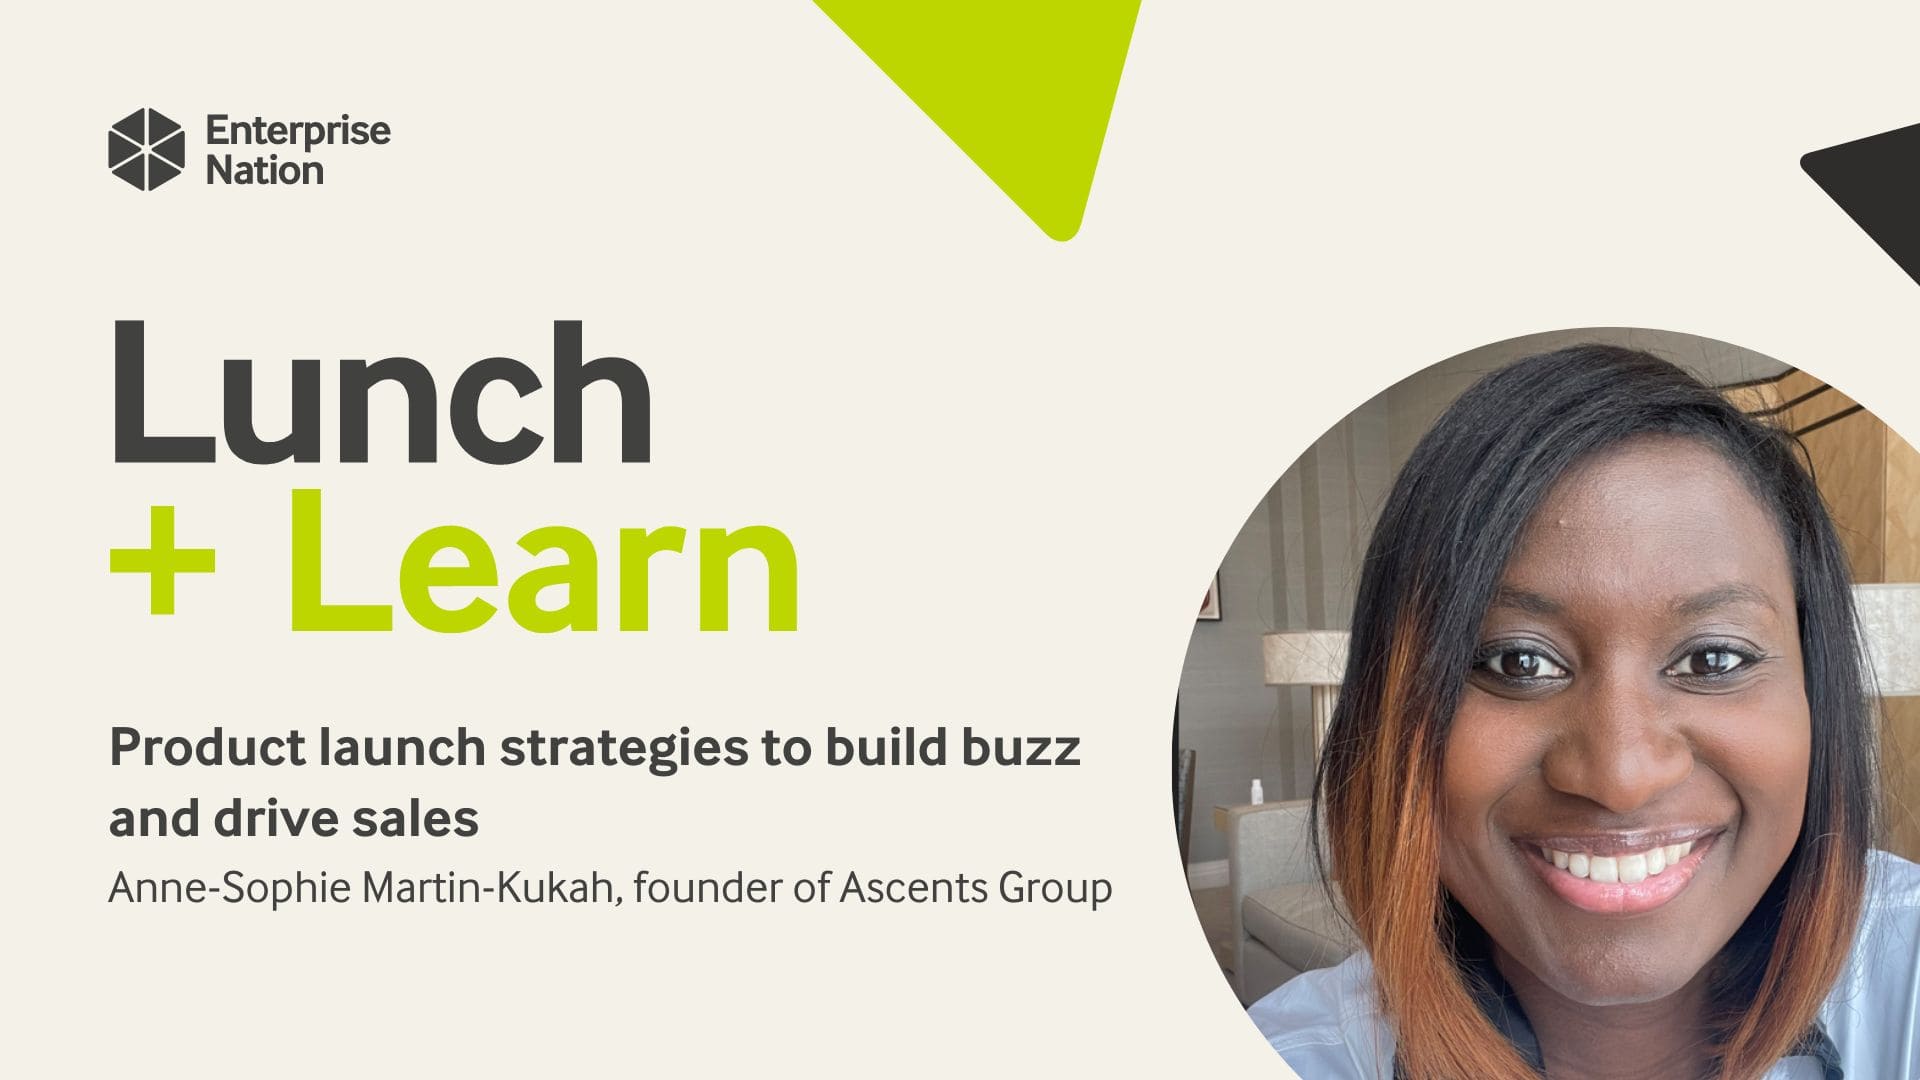 Lunch and Learn: Product launch strategies to build buzz and drive sales